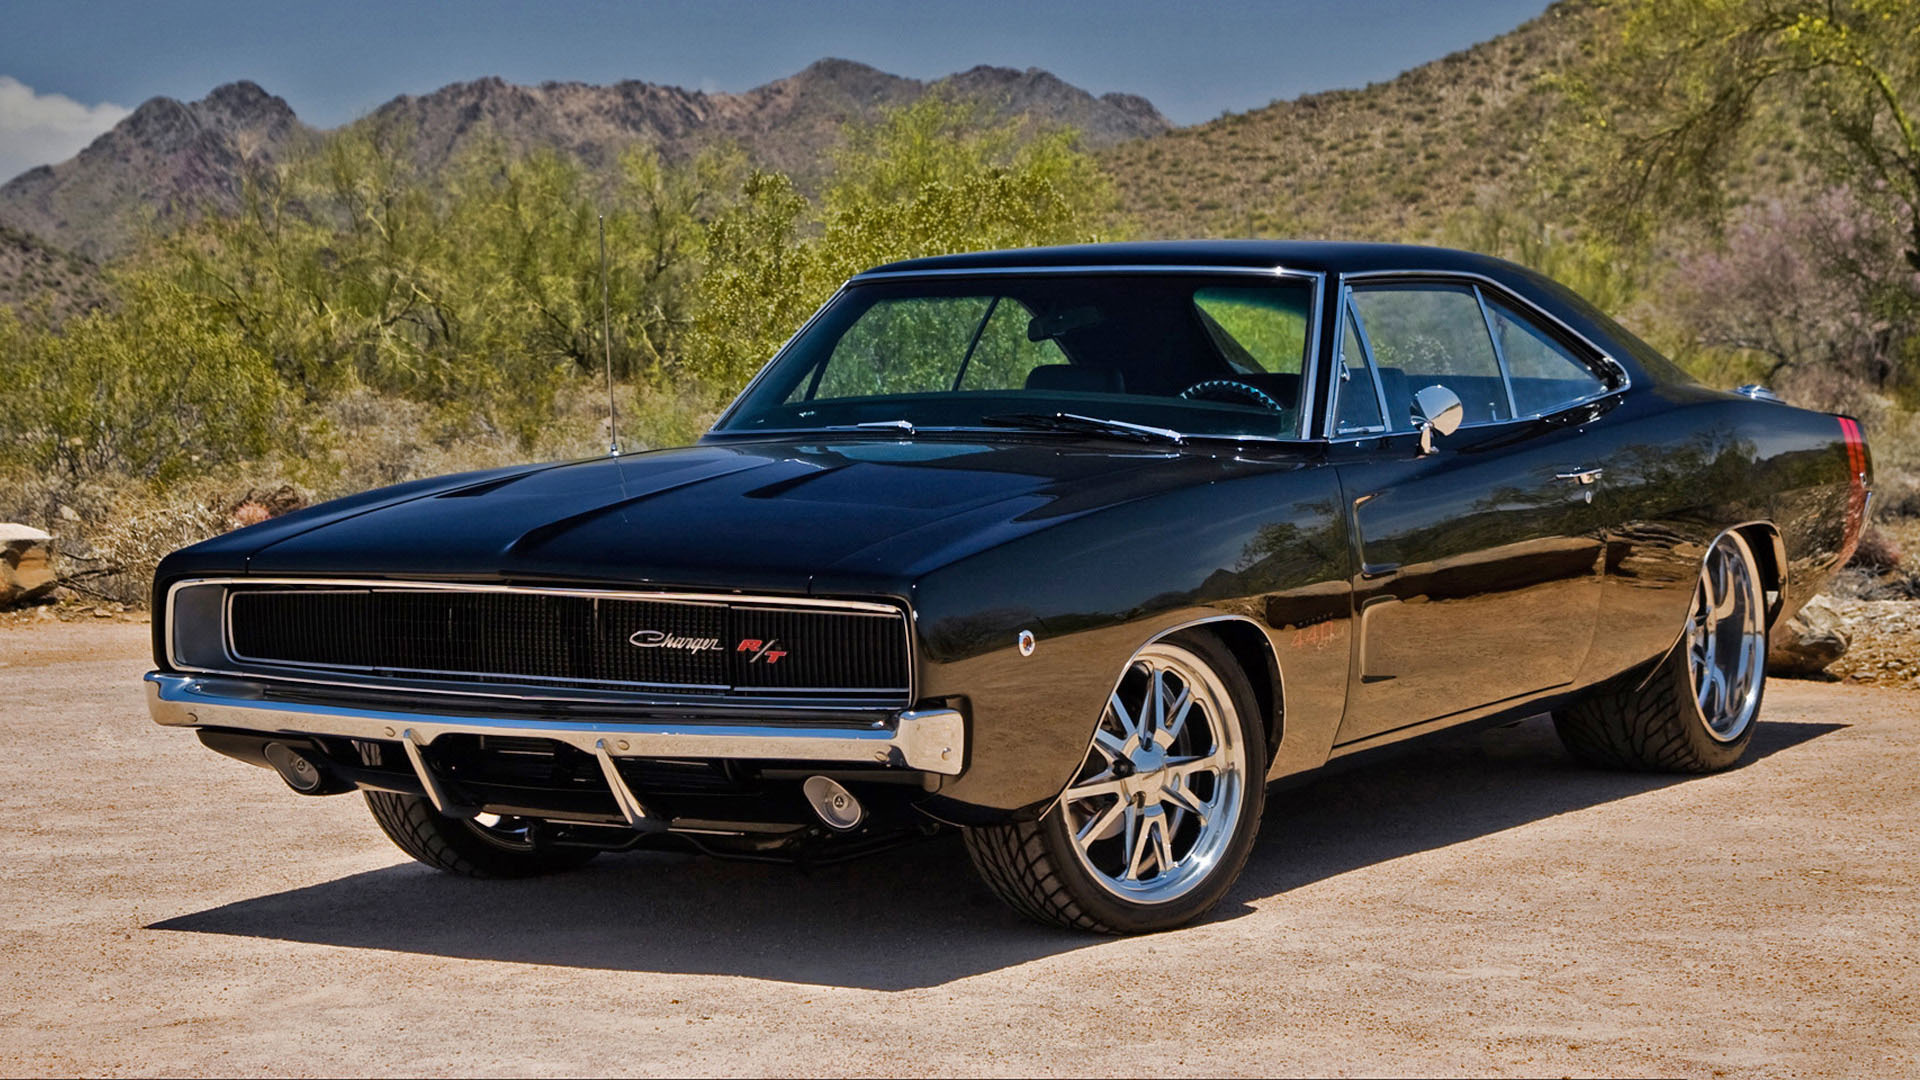 1968 - Dodge Charger RT by 4WheelsSociety on DeviantArt